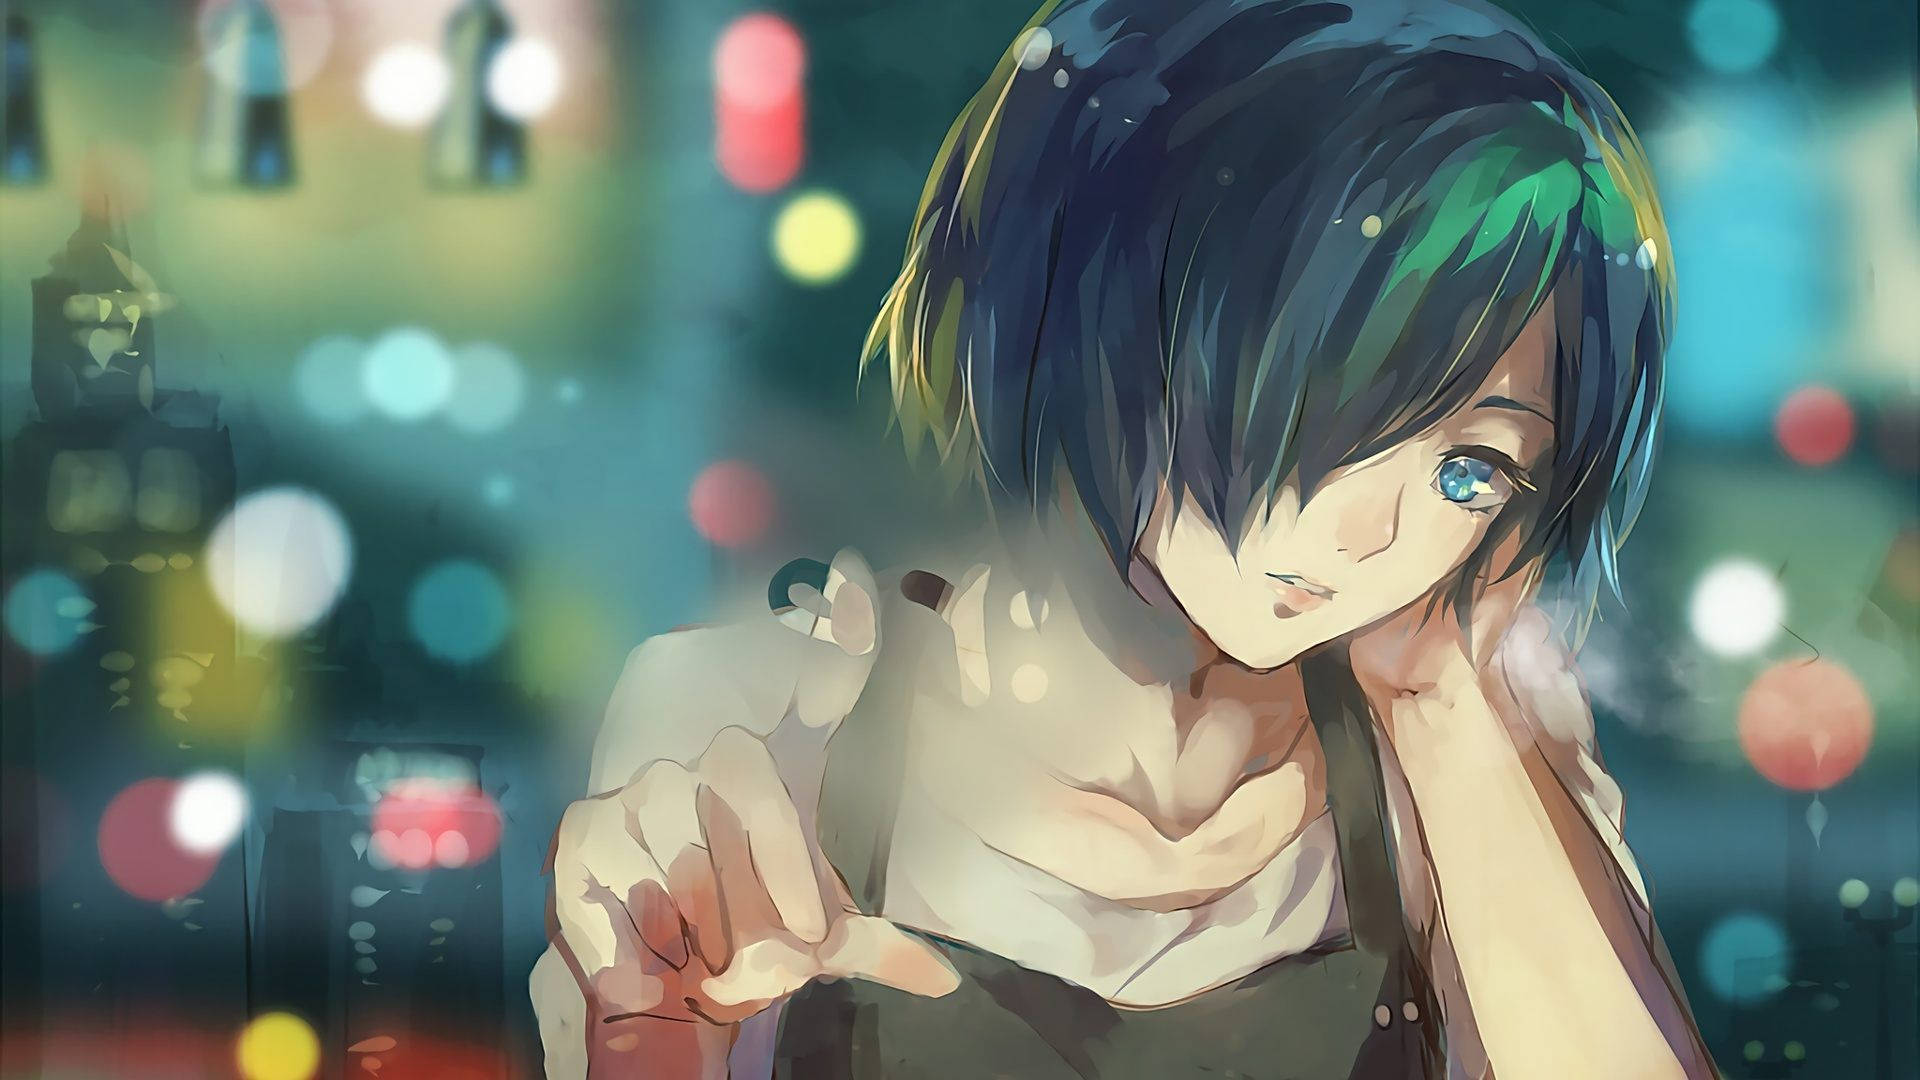 Anime Girl with short black hair touching a window glass wallpaper